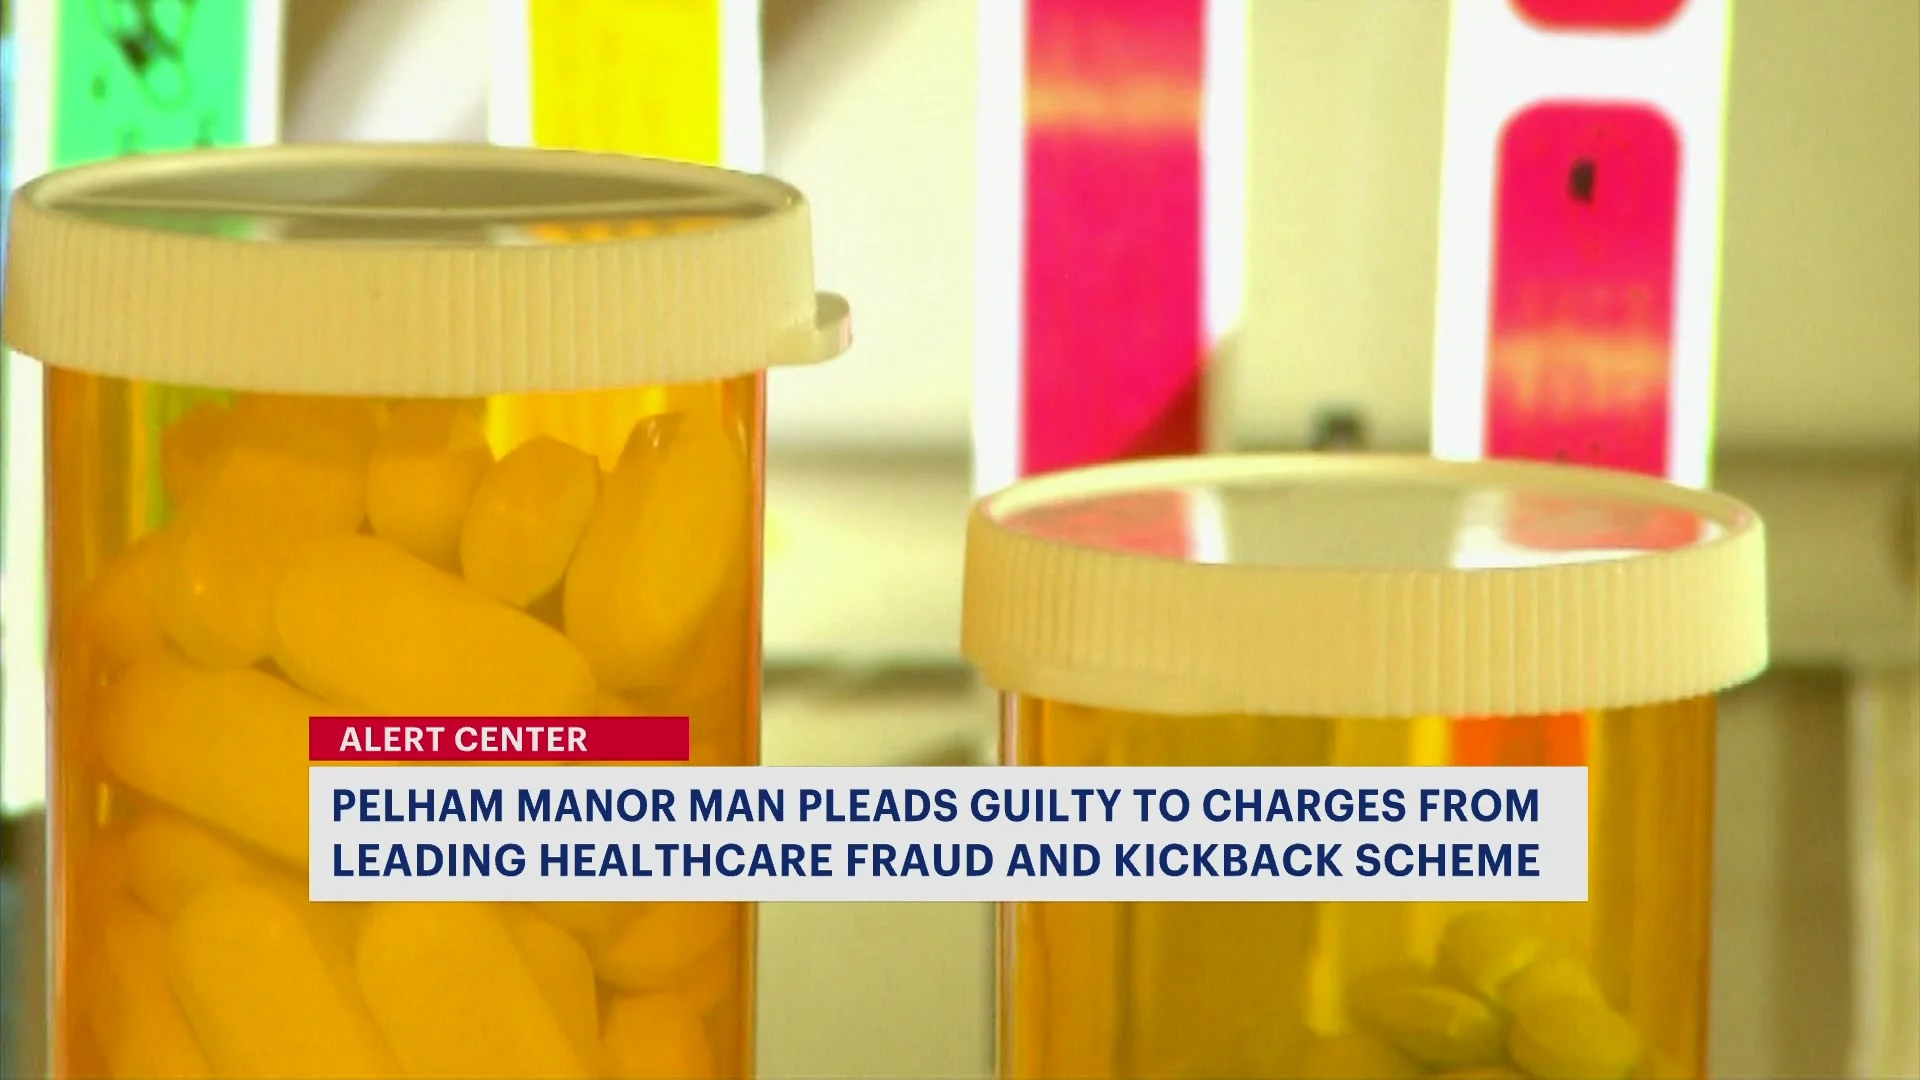 Man from Pelham Manor admits guilt in health care fraud and kickback operation